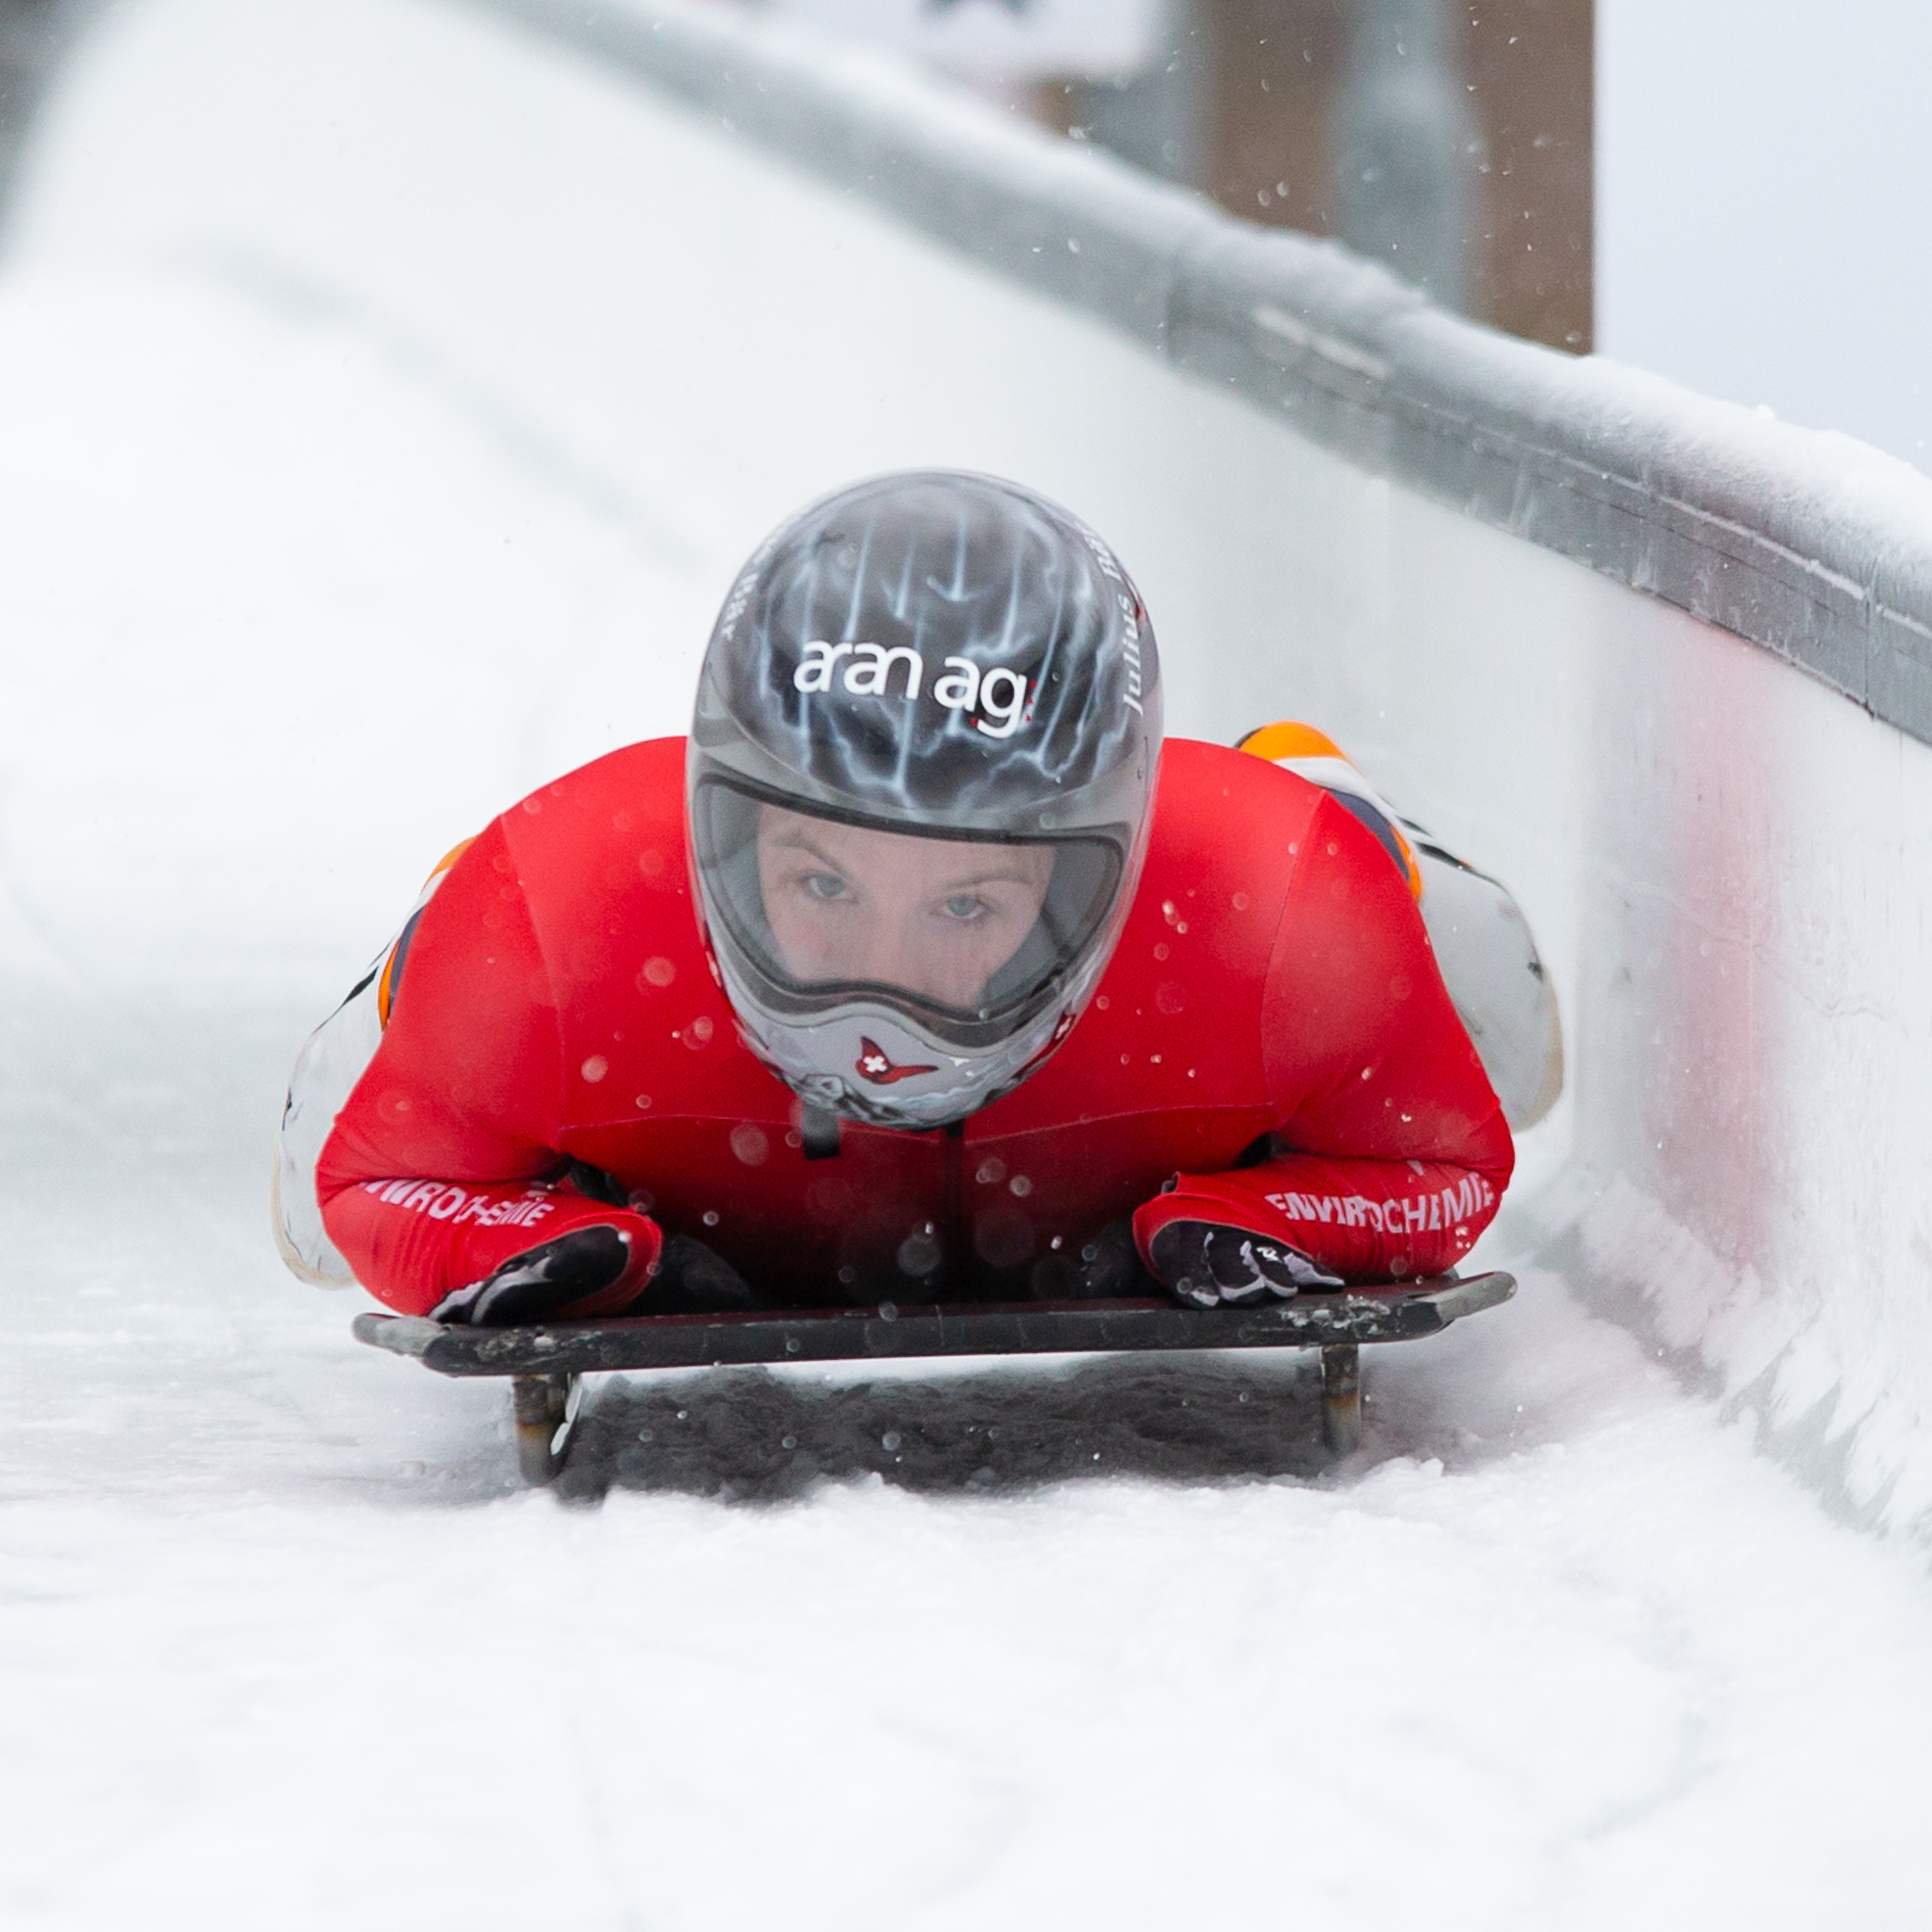 BMW IBSF World Cup Bobsleigh and Skeleton Altenberg